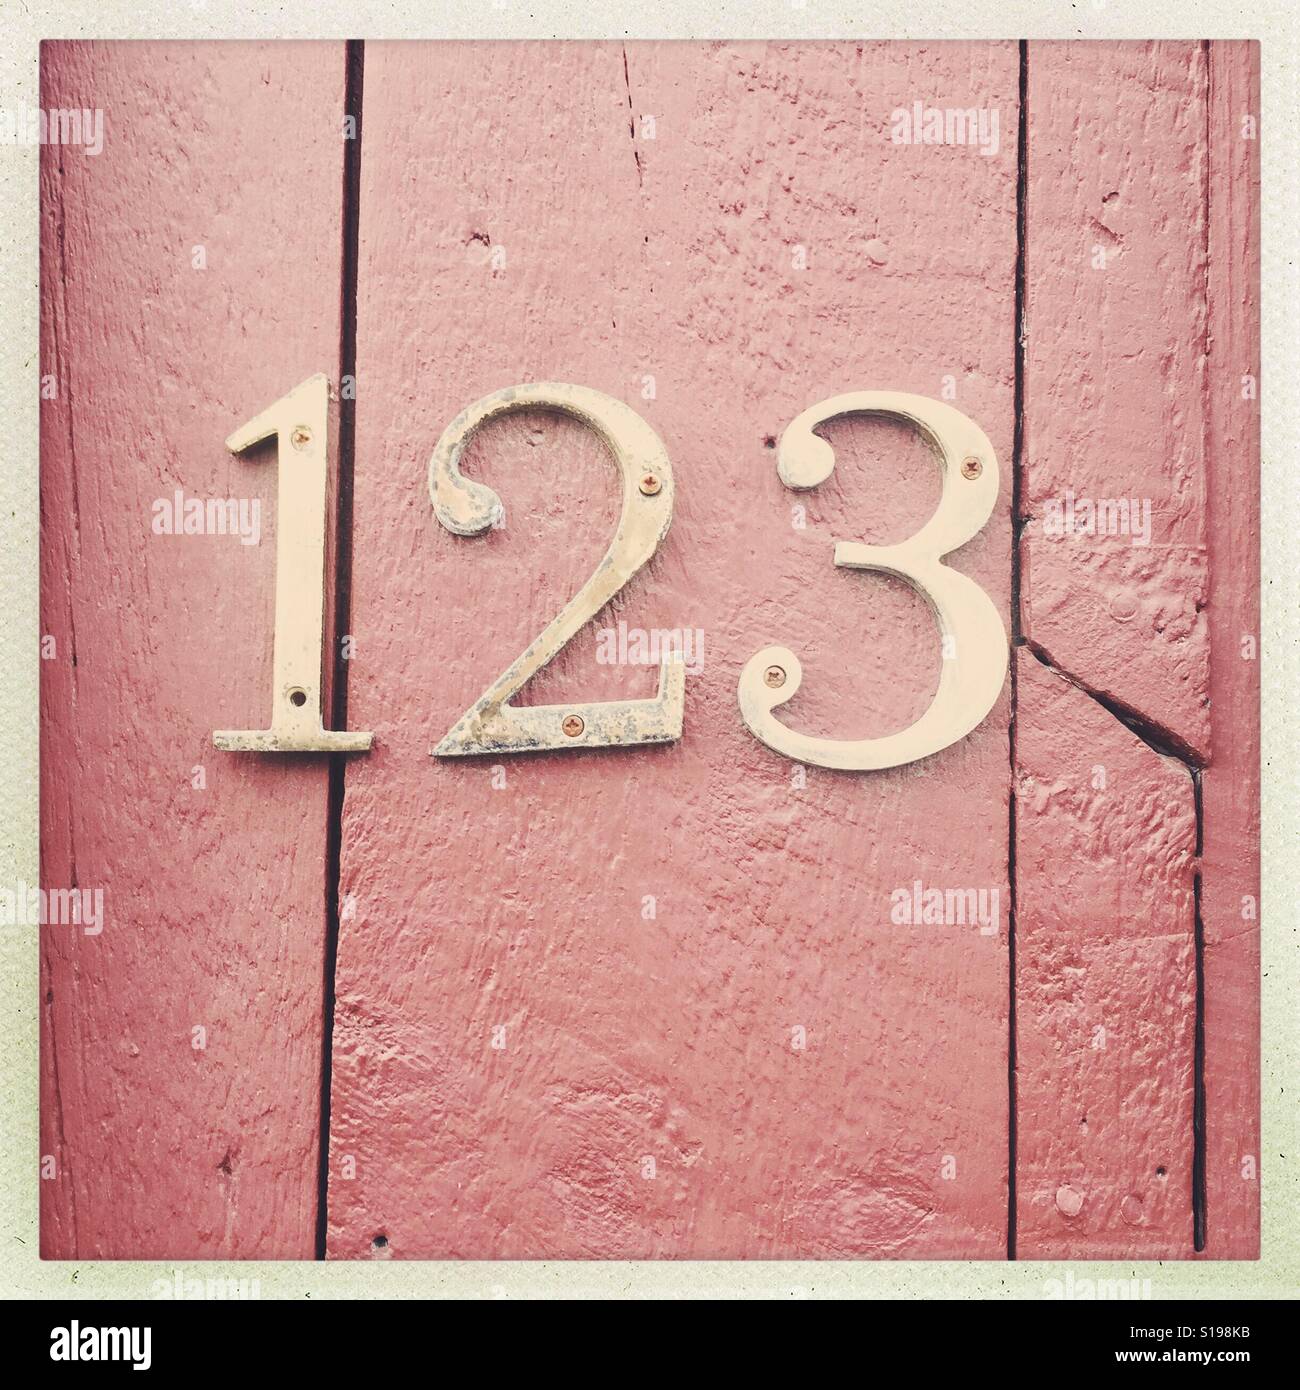 Numbers - 123 - on a red wooden wall. Stock Photo